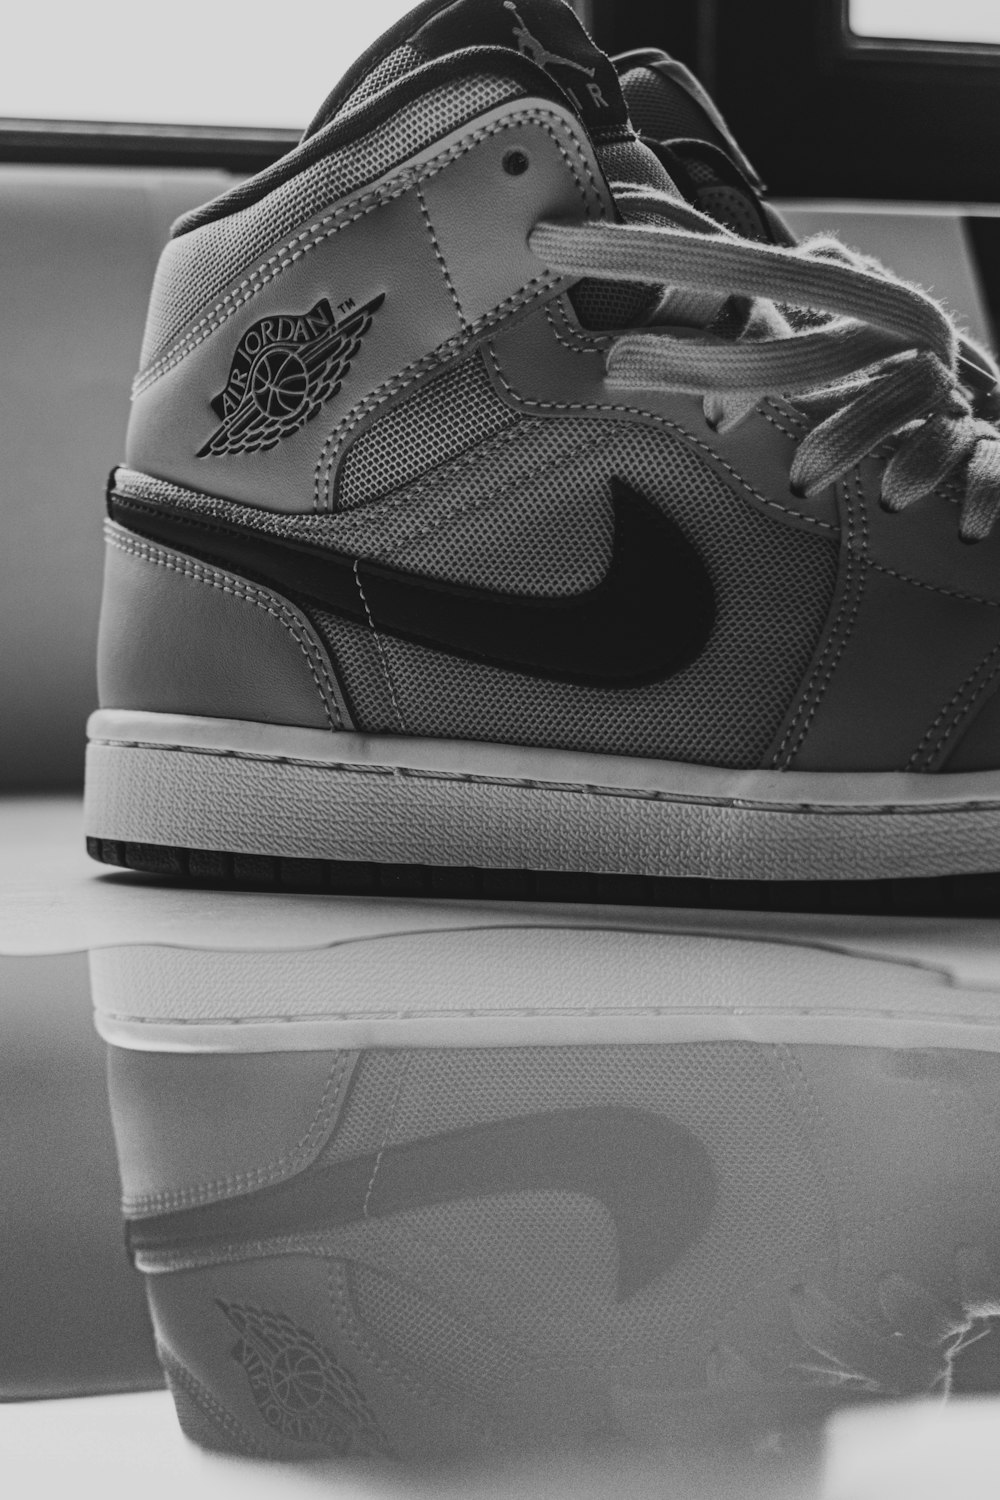 Nike Wallpaper Pictures | Download Free Images on Unsplash